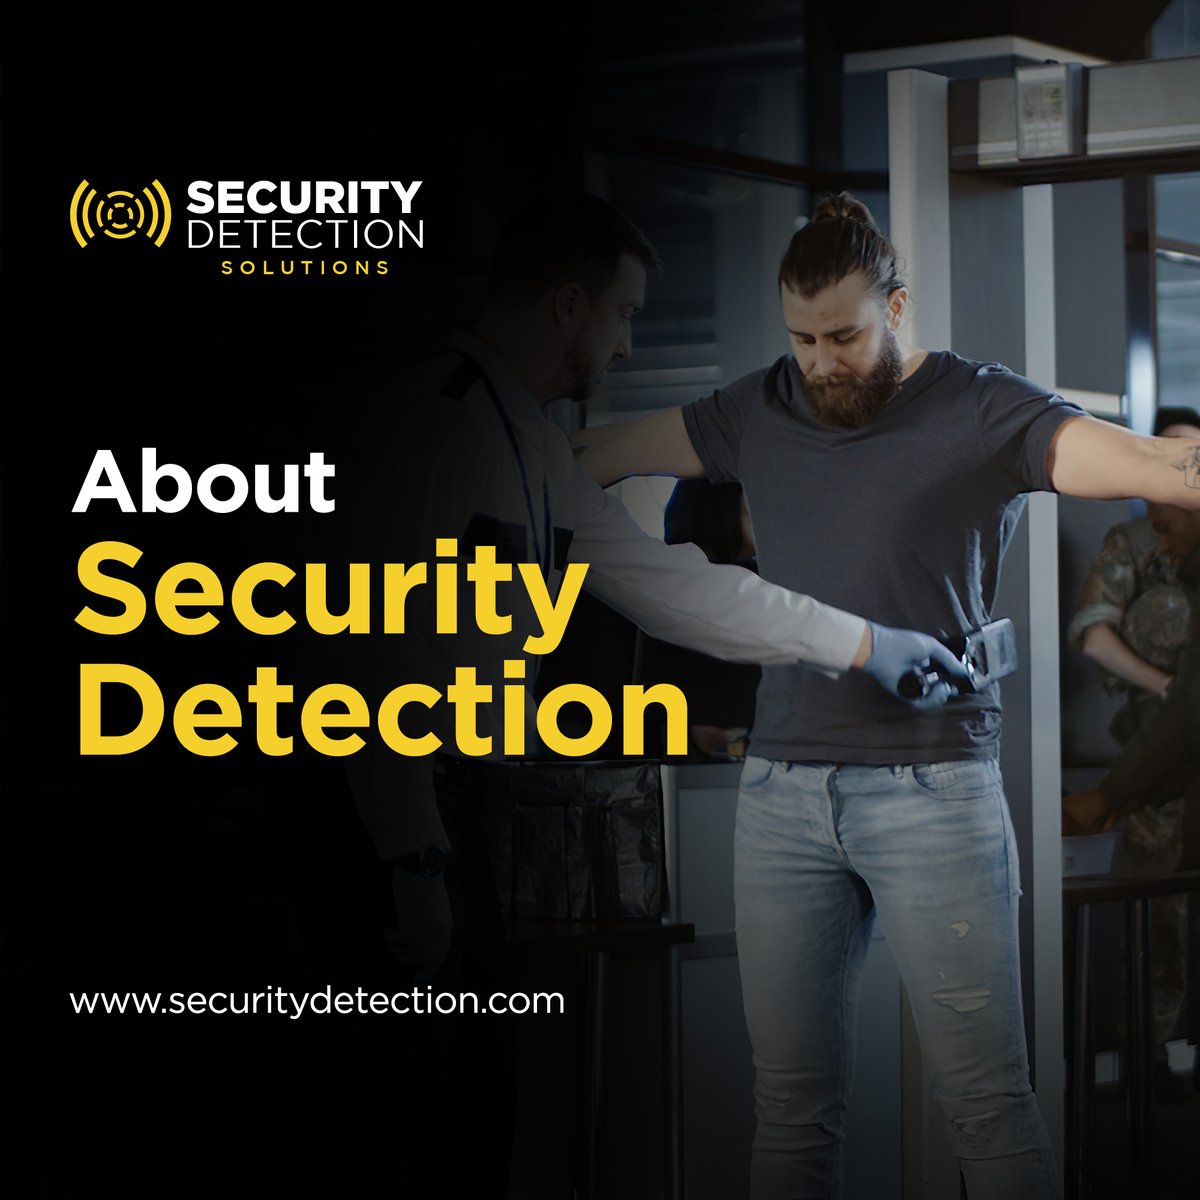 Security Detection is the largest and most experienced supplier of event security equipment in the United States. 

#Securitydetection #securityequipment #eventsecurity #xraymachines #bodydetectors #securitywand #metaldetectors #reliablesecurity #explosivedetectors